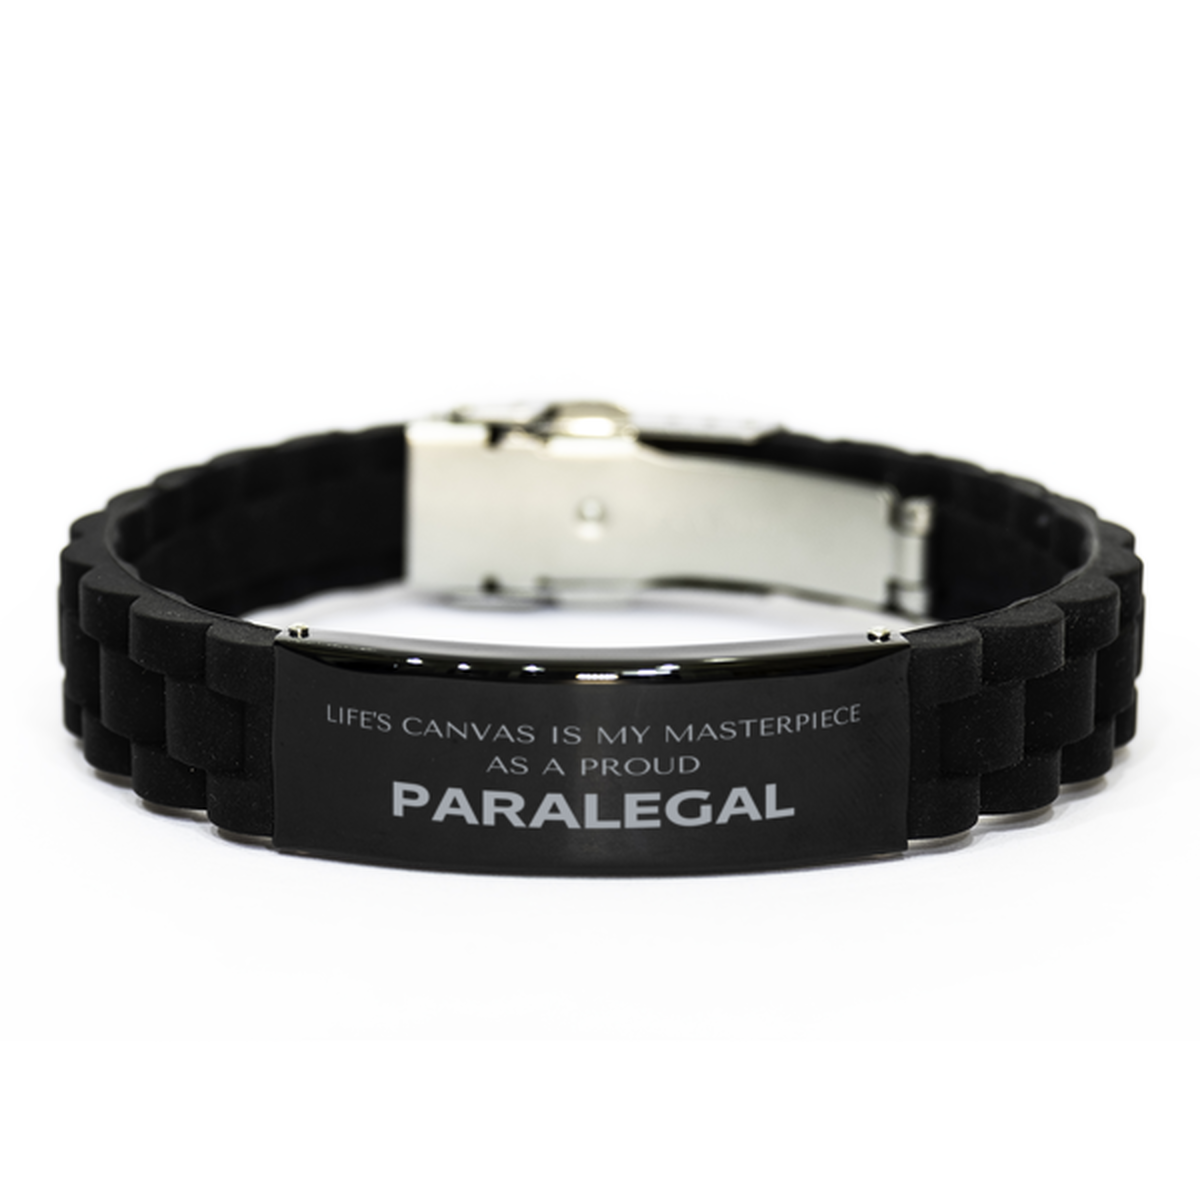 Proud Paralegal Gifts, Life's canvas is my masterpiece, Epic Birthday Christmas Unique Black Glidelock Clasp Bracelet For Paralegal, Coworkers, Men, Women, Friends